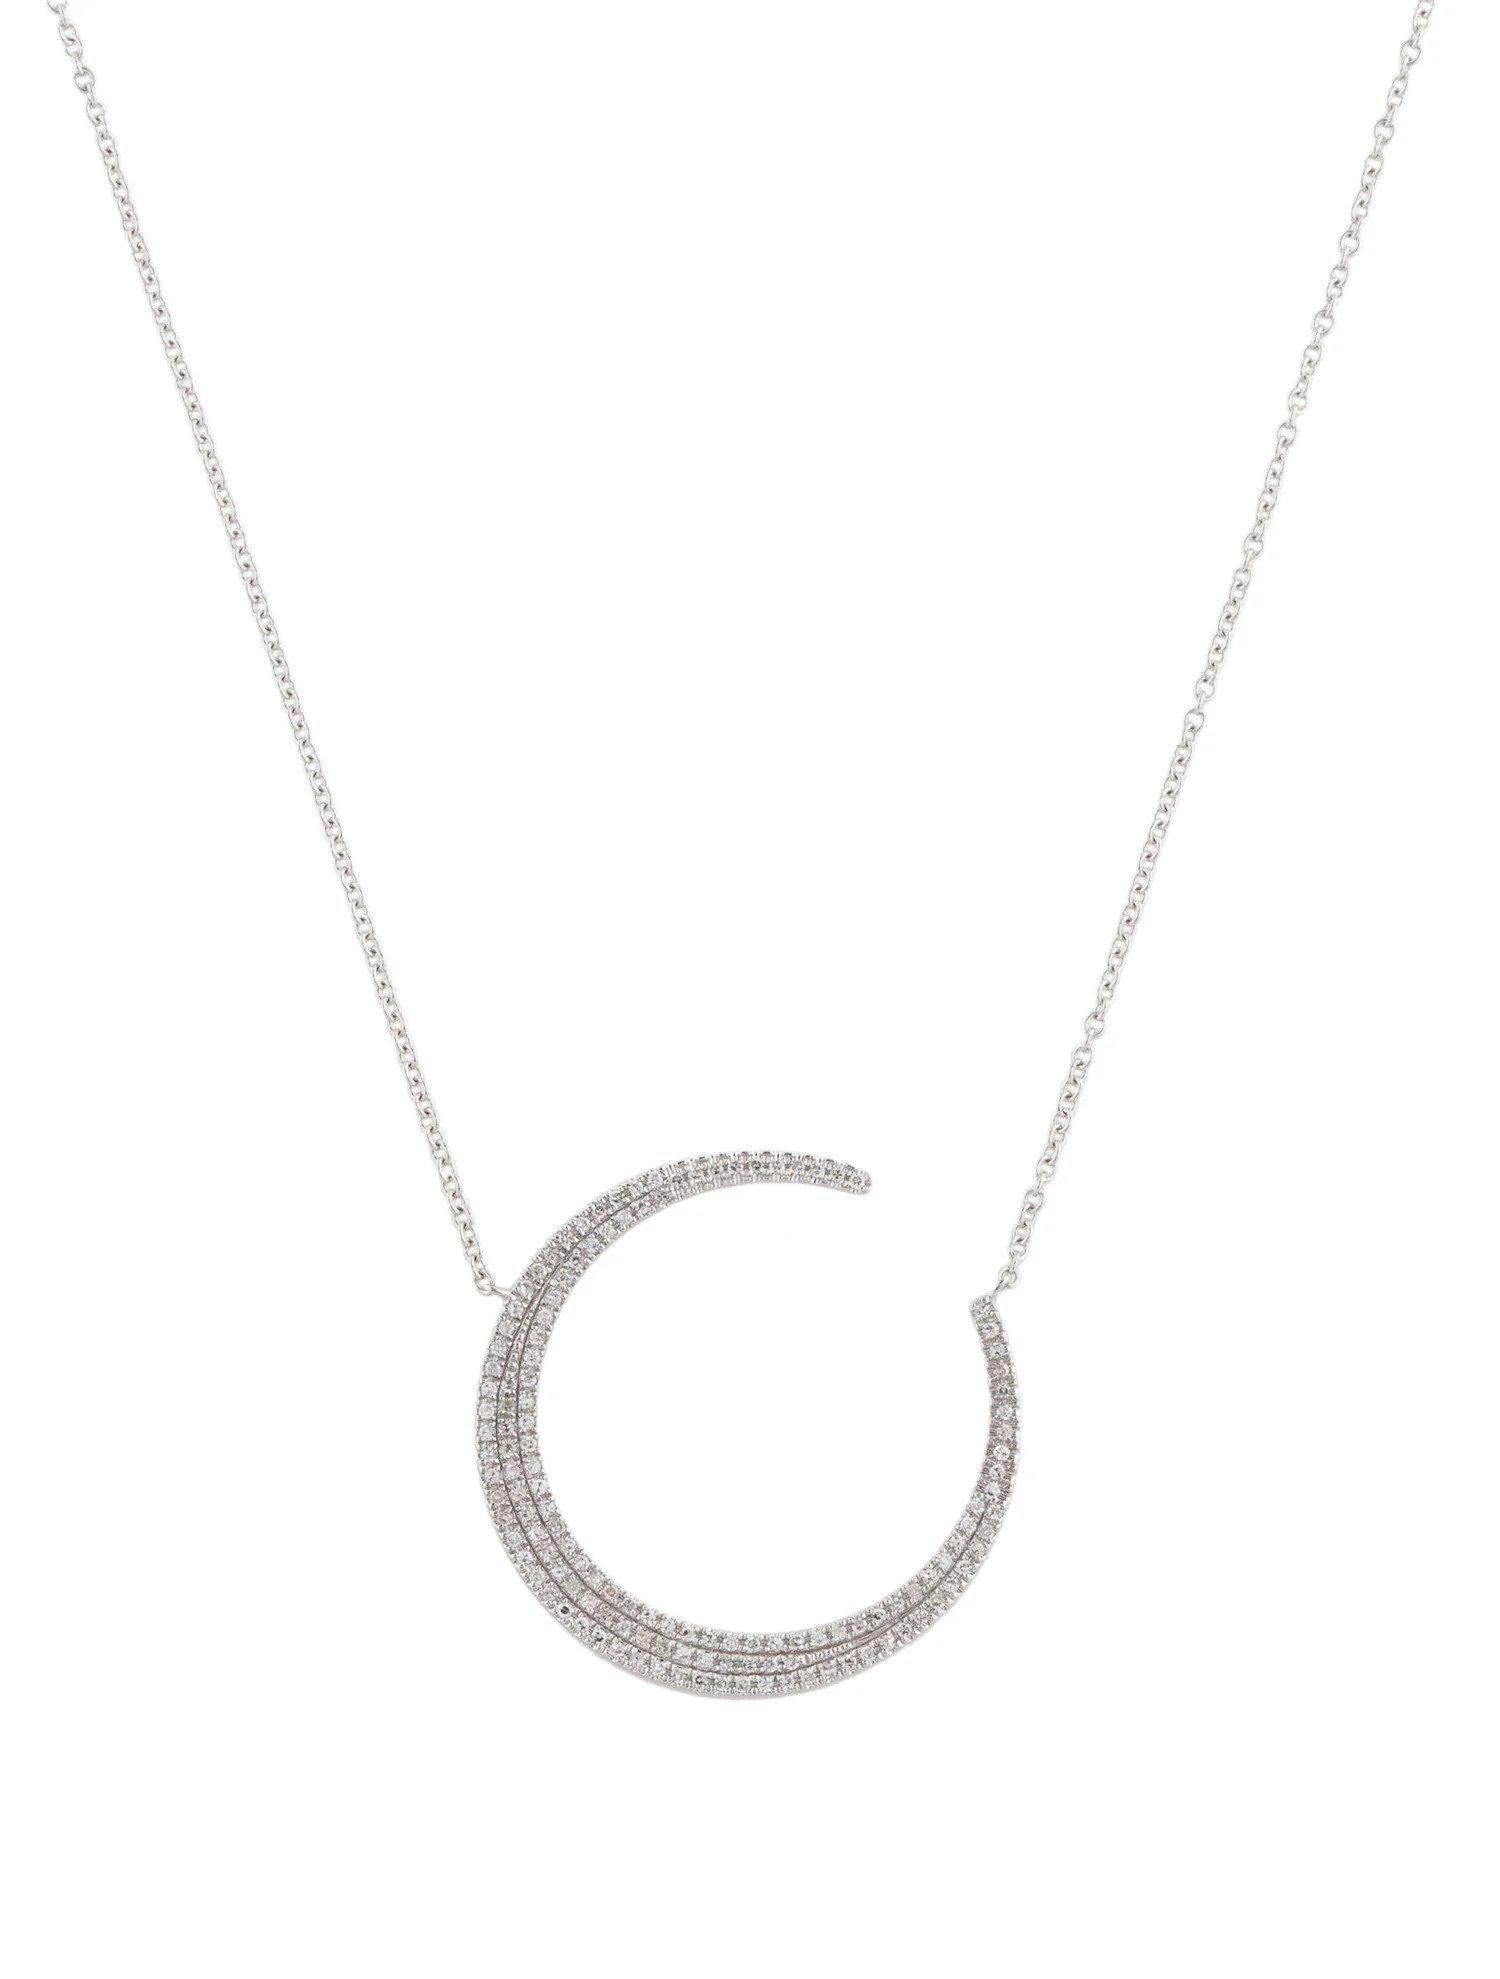 0.37 Carat Diamond Crescent Moon White Gold Pendant Necklace In New Condition For Sale In Great Neck, NY